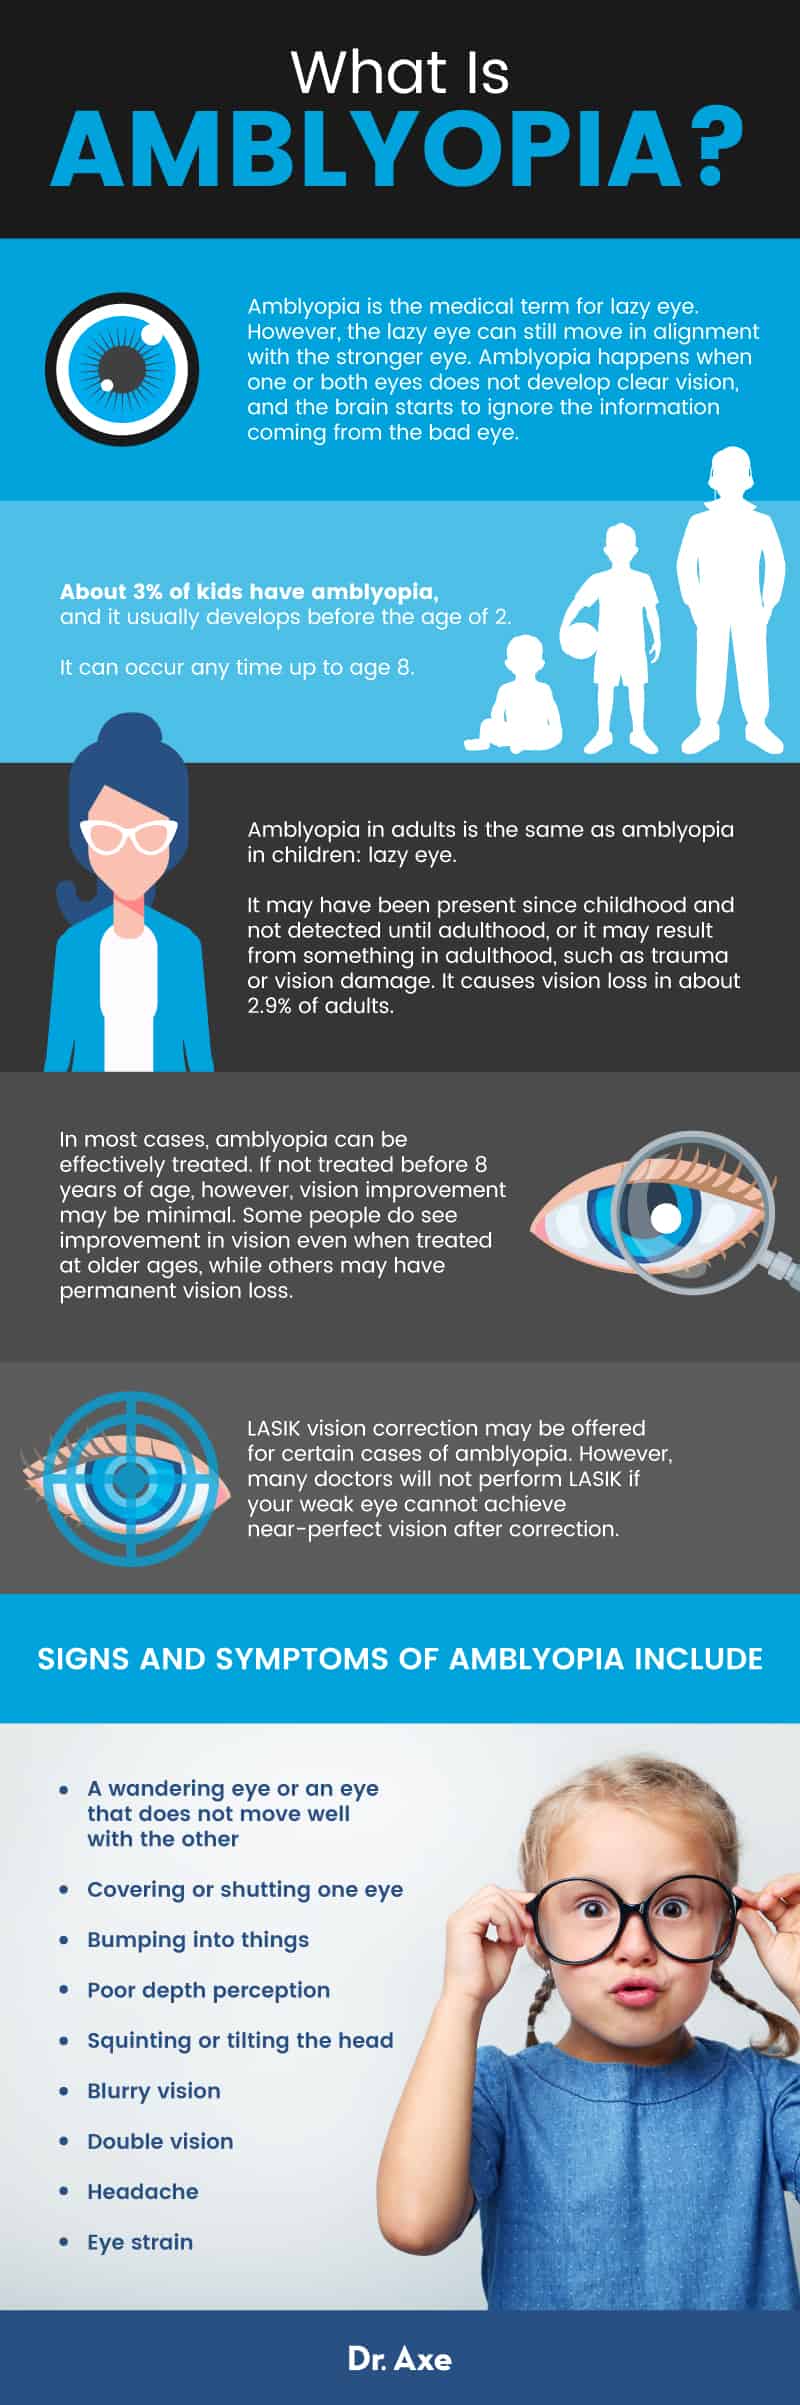 What is amblyopia? - Dr. Axe